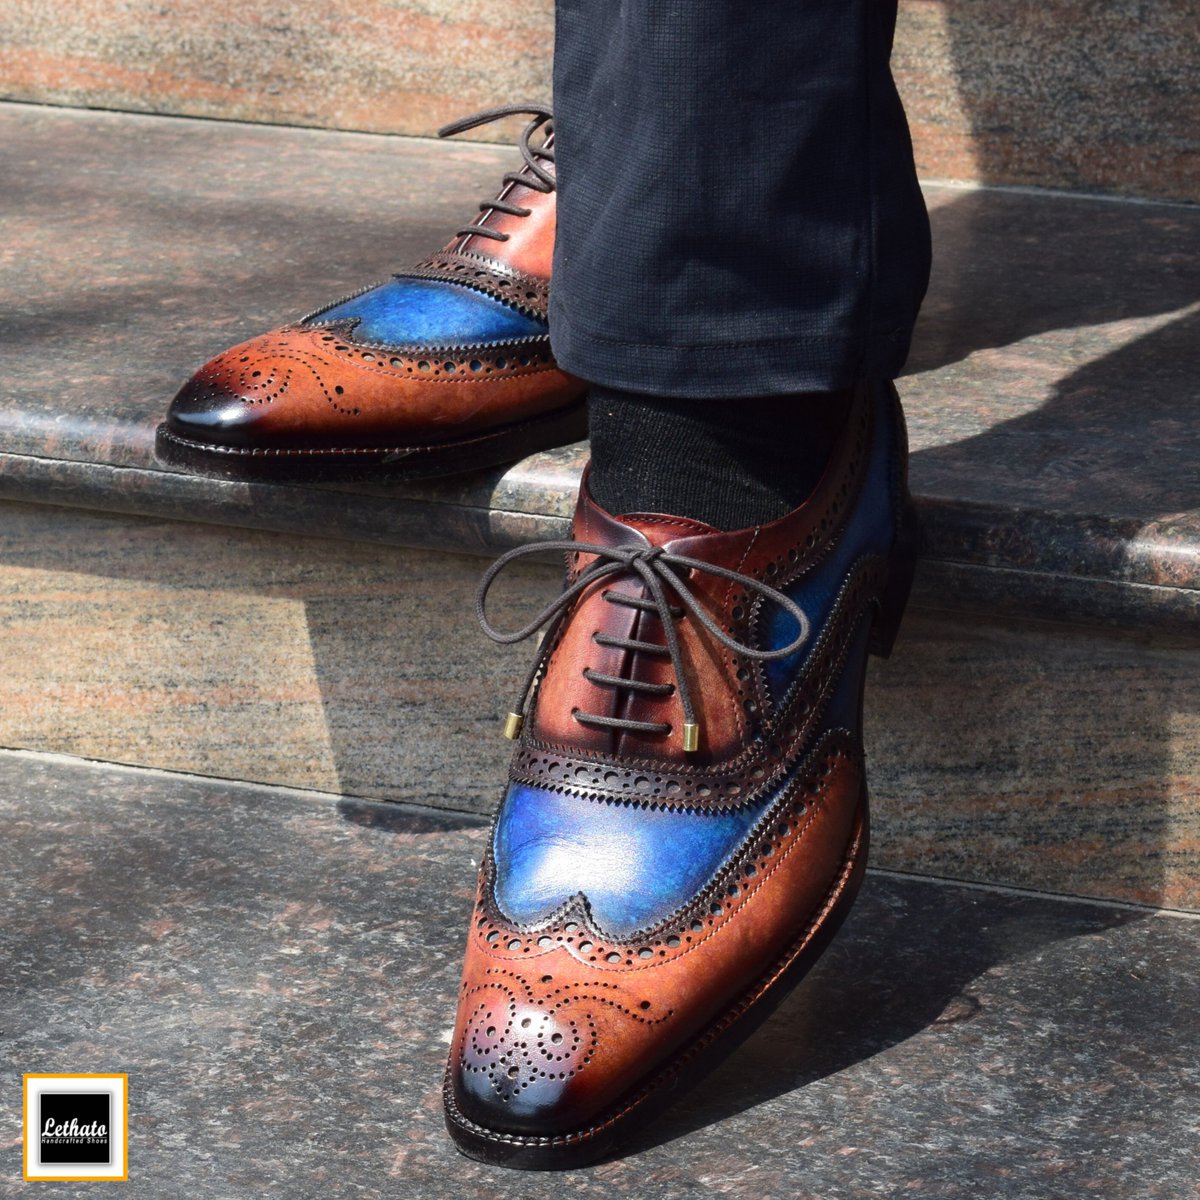 Wingtip Brogue Oxford shoes by Lethato are a classic choice, and the combination of brown and blue adds a stylish twist. . . . #weddingshoesformen #menweddingshoes #formalshoesformen #italianleathershoes #formalshoes #oxfordshoe #lethatoshoes #lethato #mensfootwear #menswear